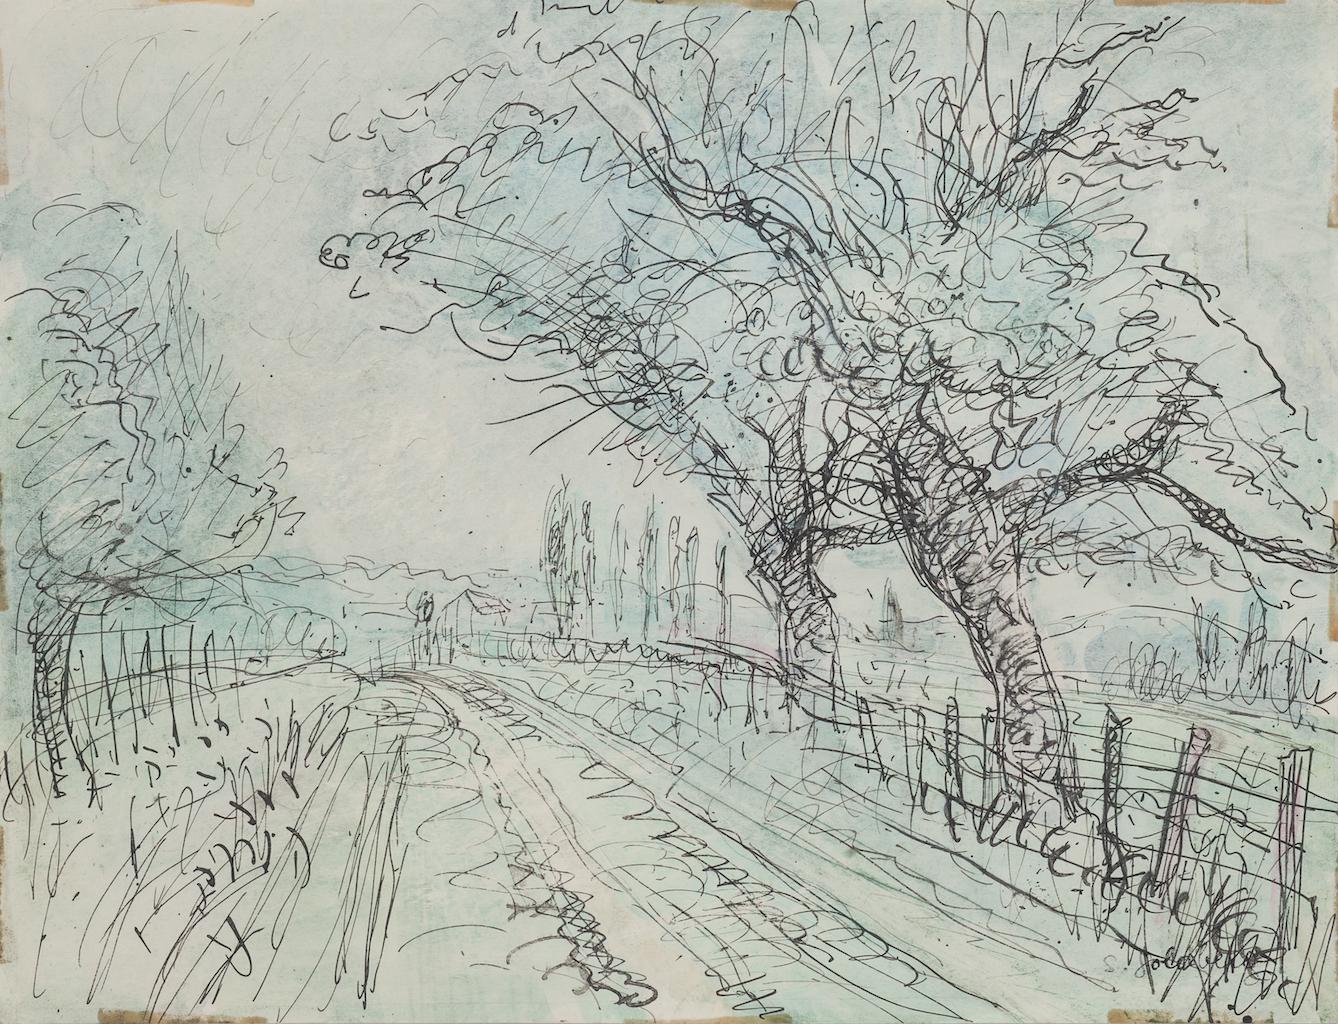 Landscape is an original drawing in pencil on paper, realized by Jean Delpech (1916-1988). 

The state of preservation of the artwork is good.

Sheet dimension: 20 x 26.5 cm.

The artwork represents a beautiful landscape skillfully depicted through